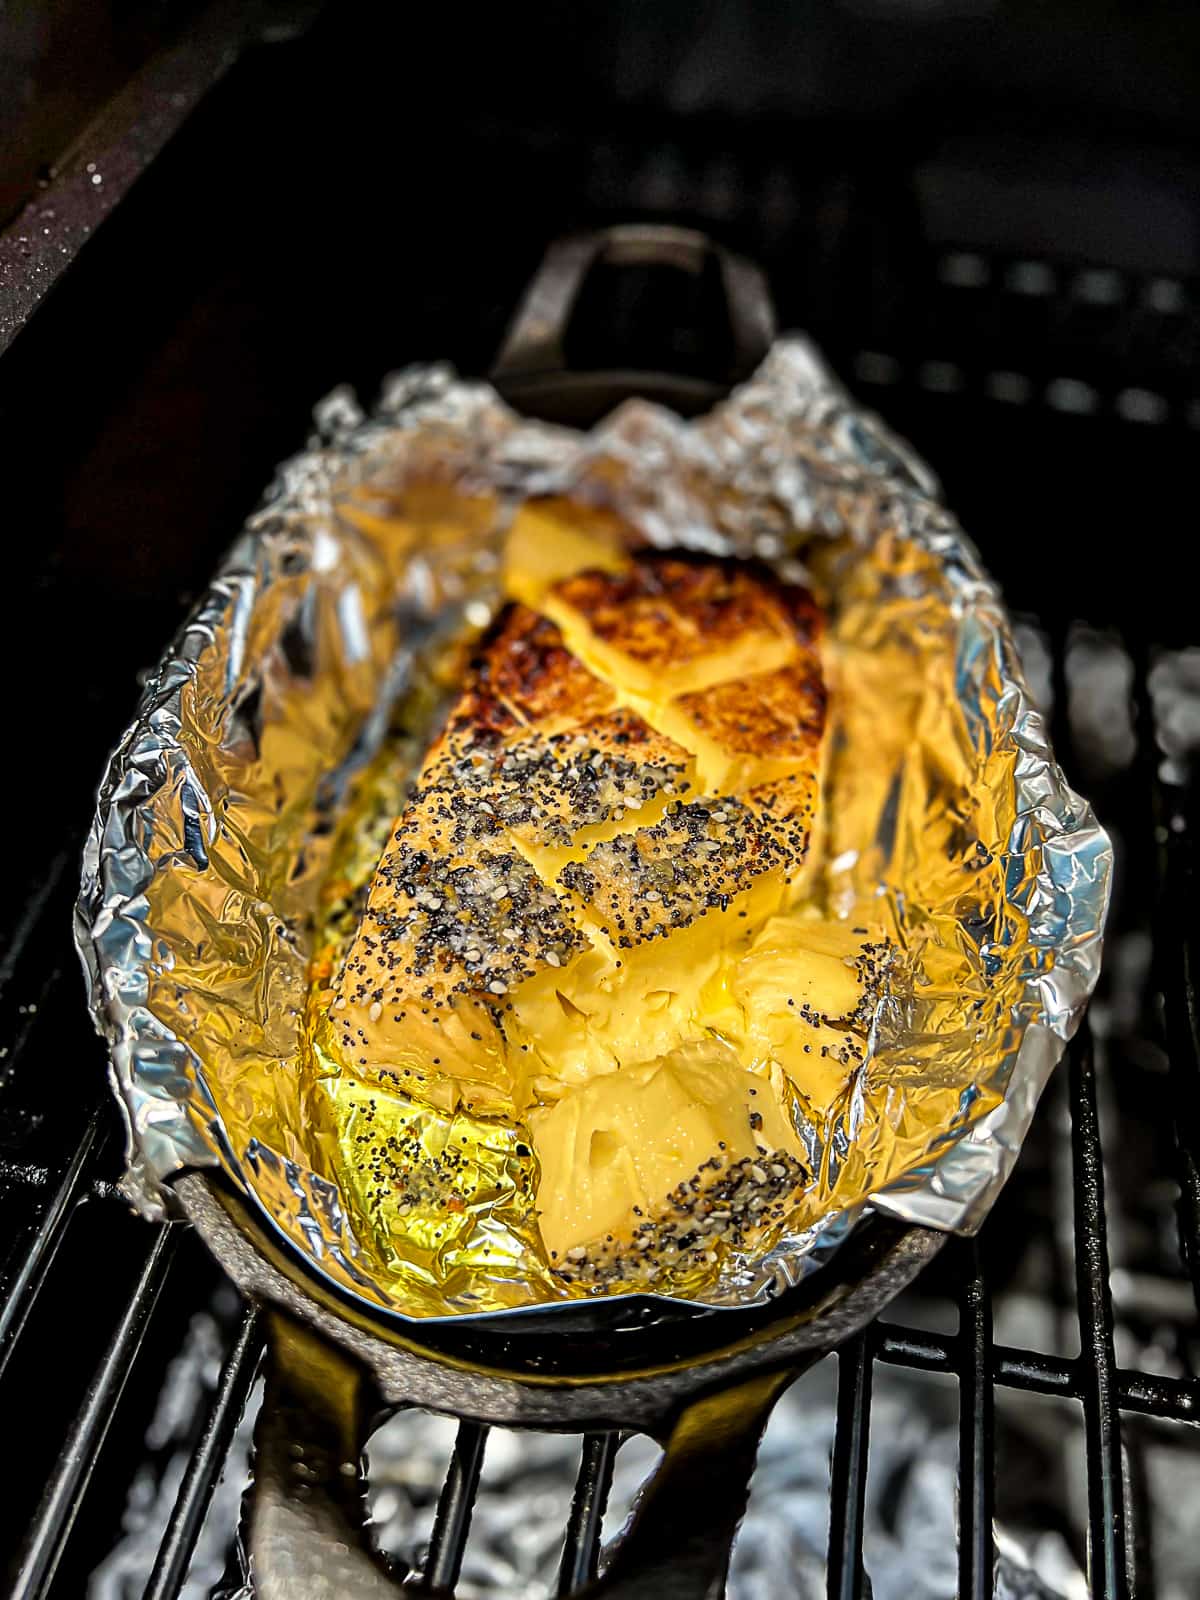 Traeger Smoking Cream Cheese In A Cast Iron Skillet With Sweet And Savory Spice Blends